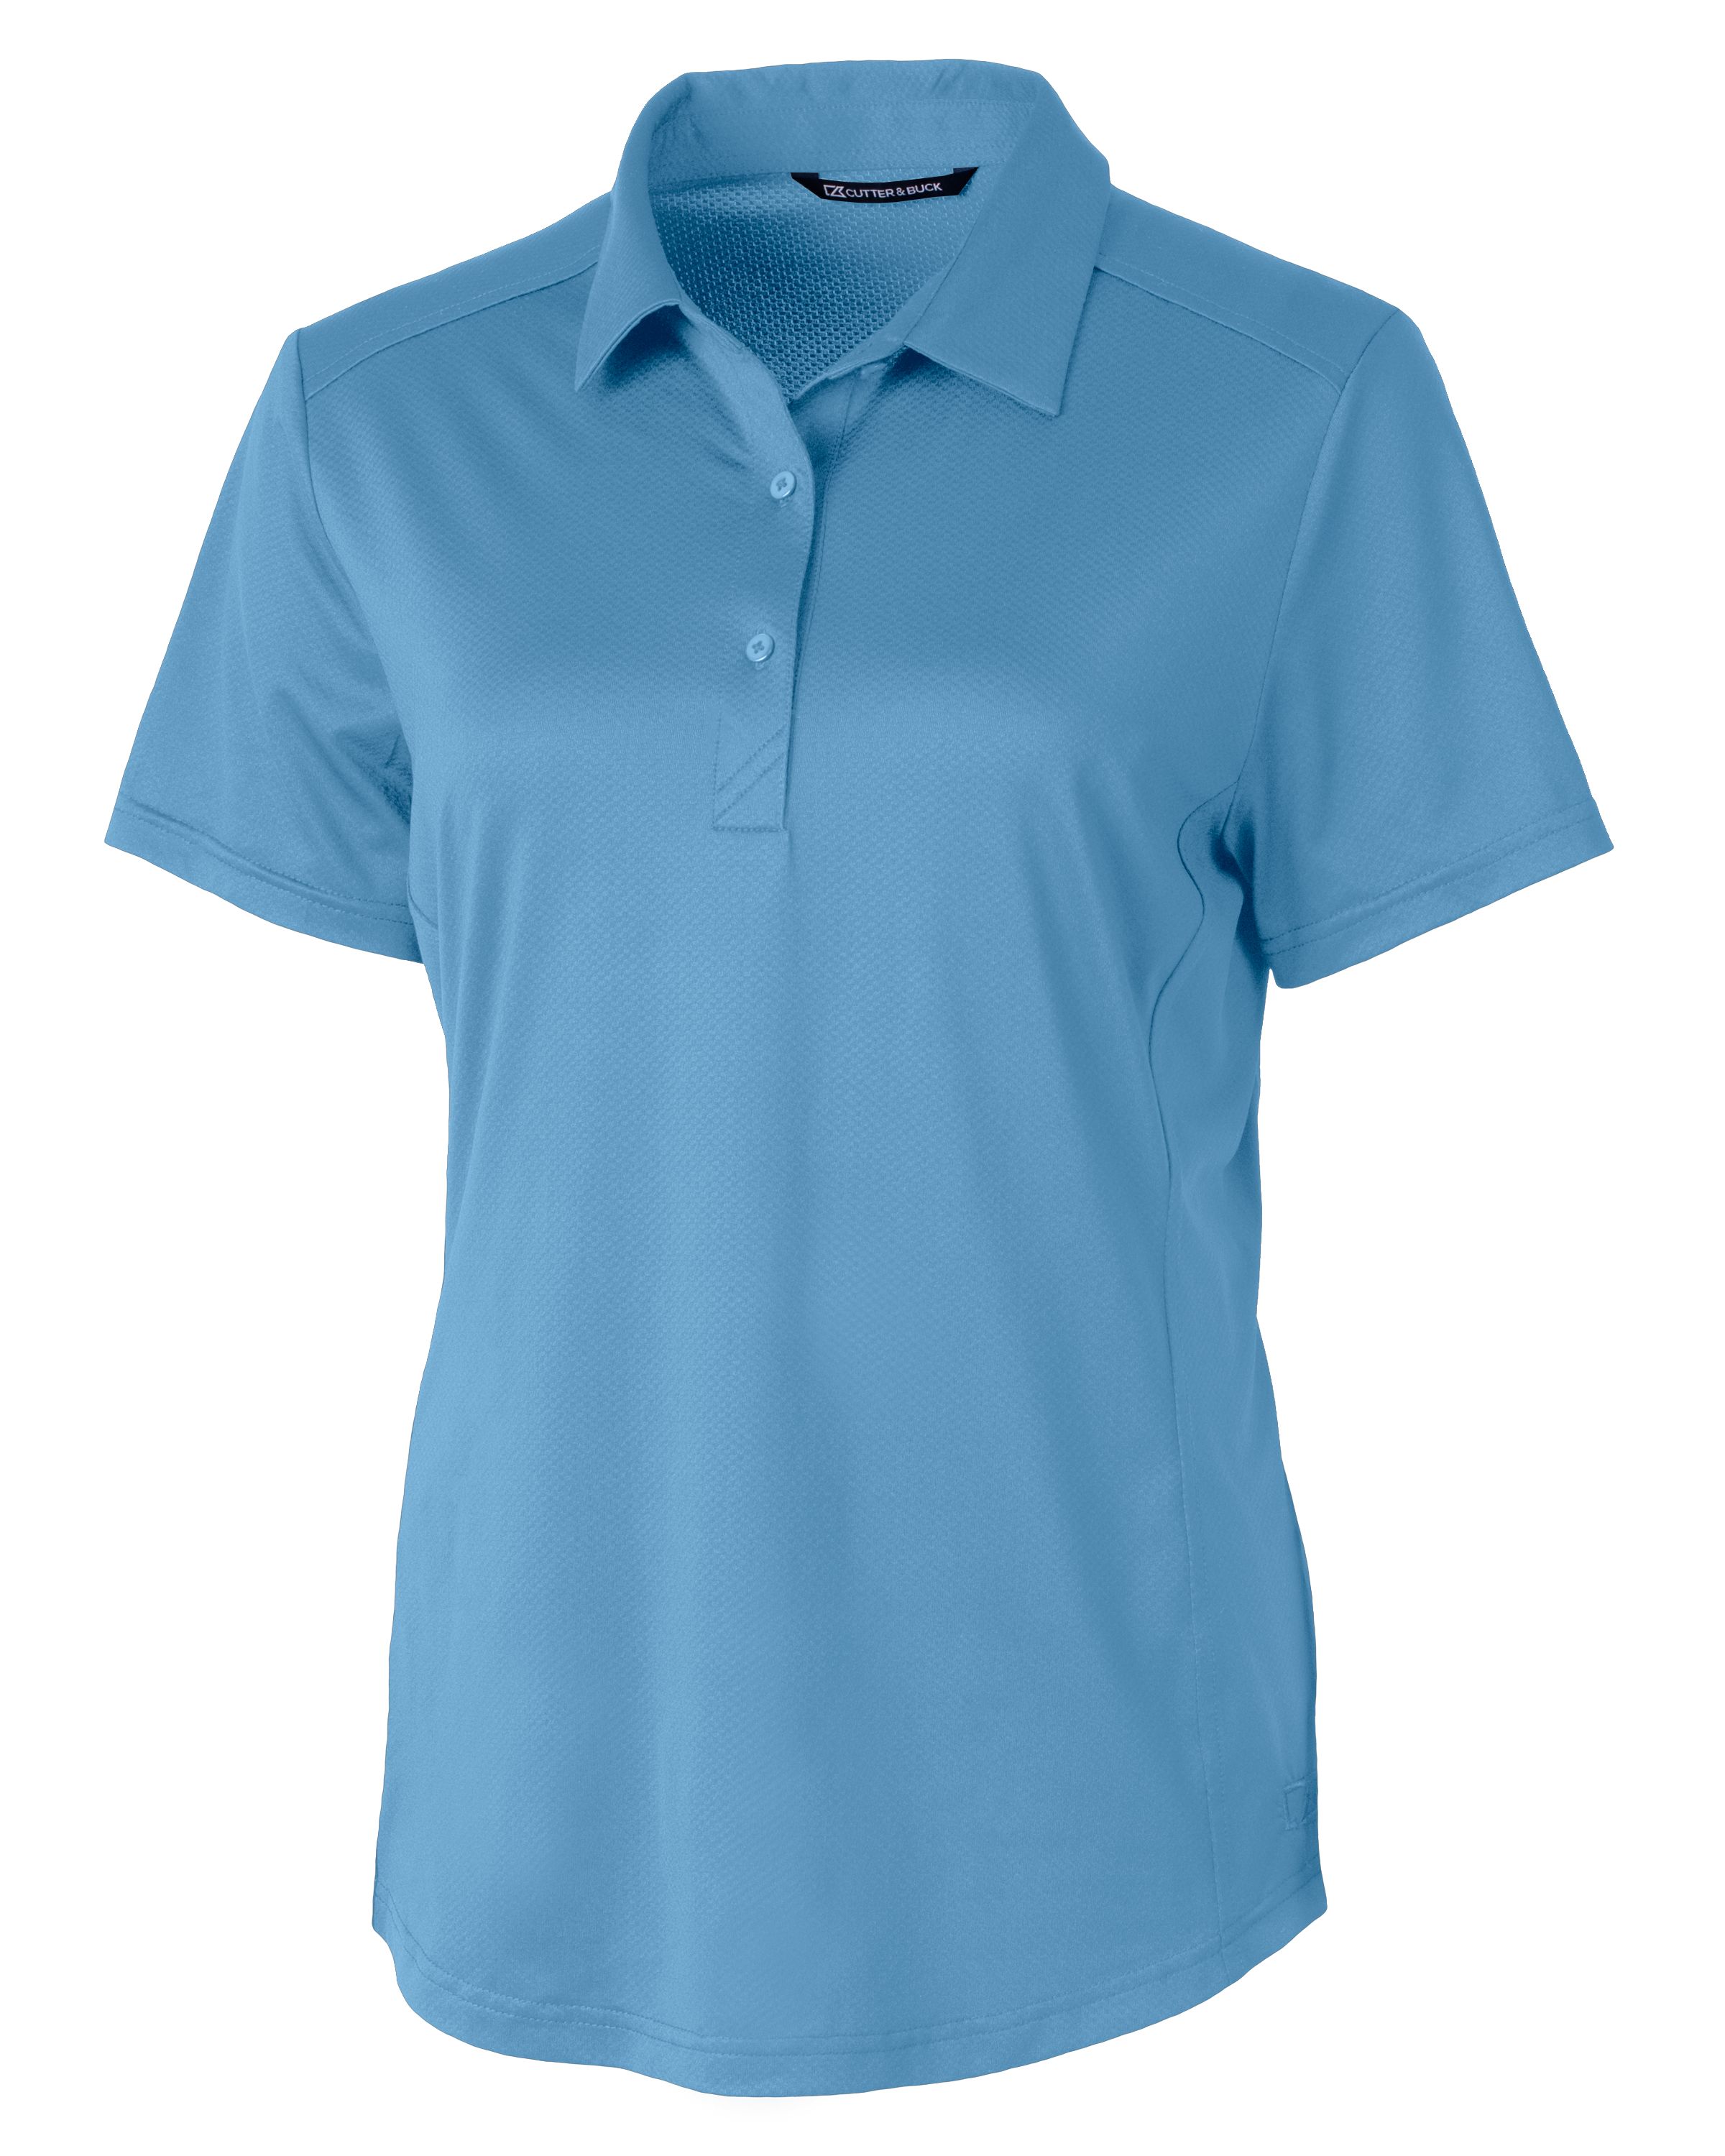 CB Prospect Textured Stretch Womens Short Sleeve Polo-